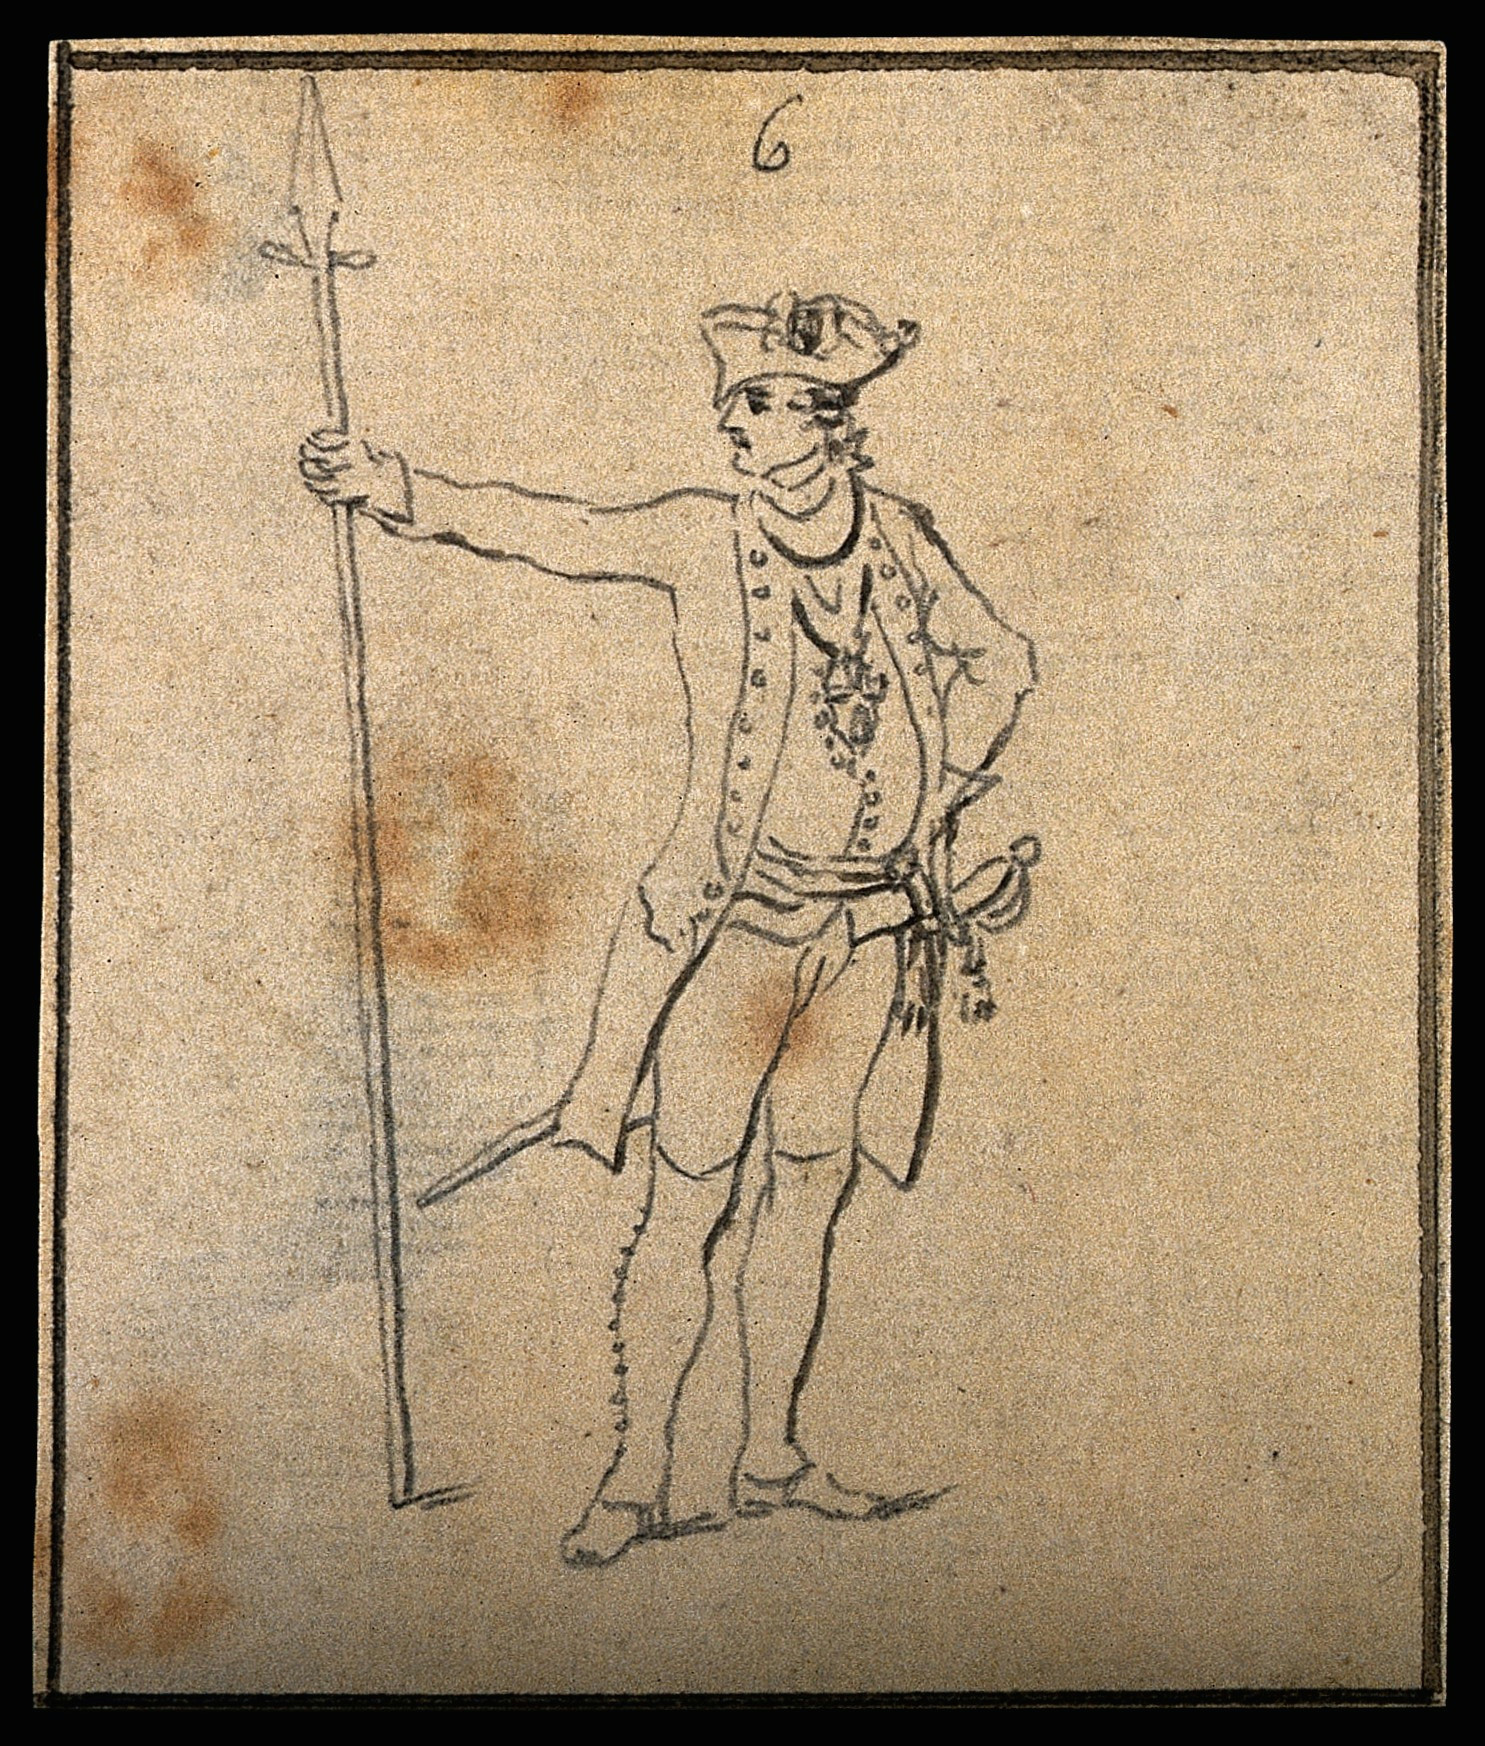 Drawing C Class File A soldier In the Prussian Army Drawing C 1794 Wellcome